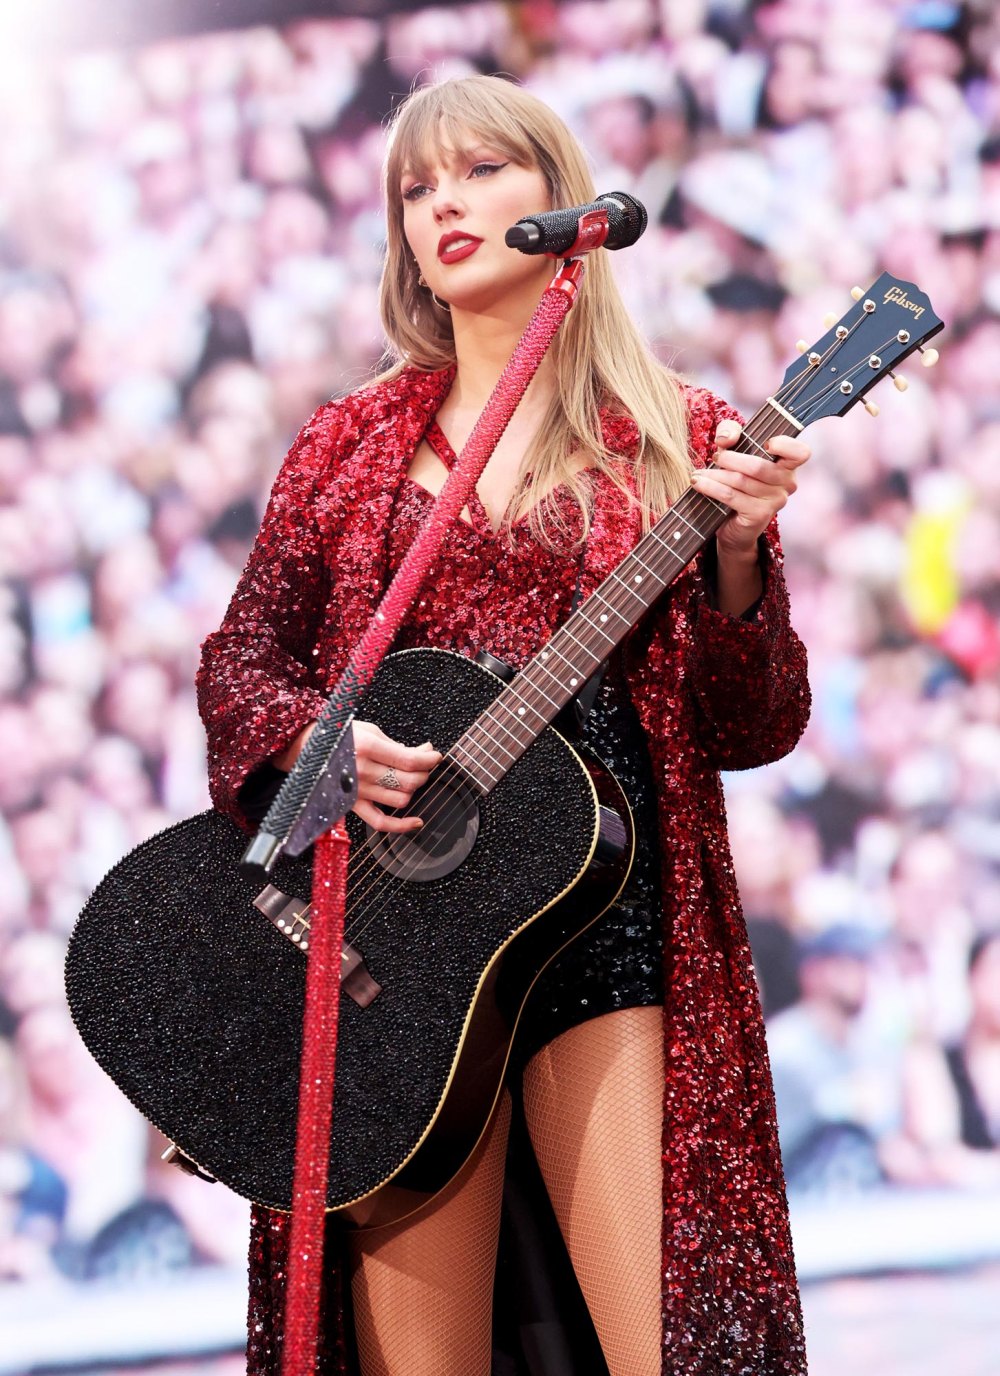 Taylor Swift Praises Wembley Stadium Officials for Helping Fan Quickly